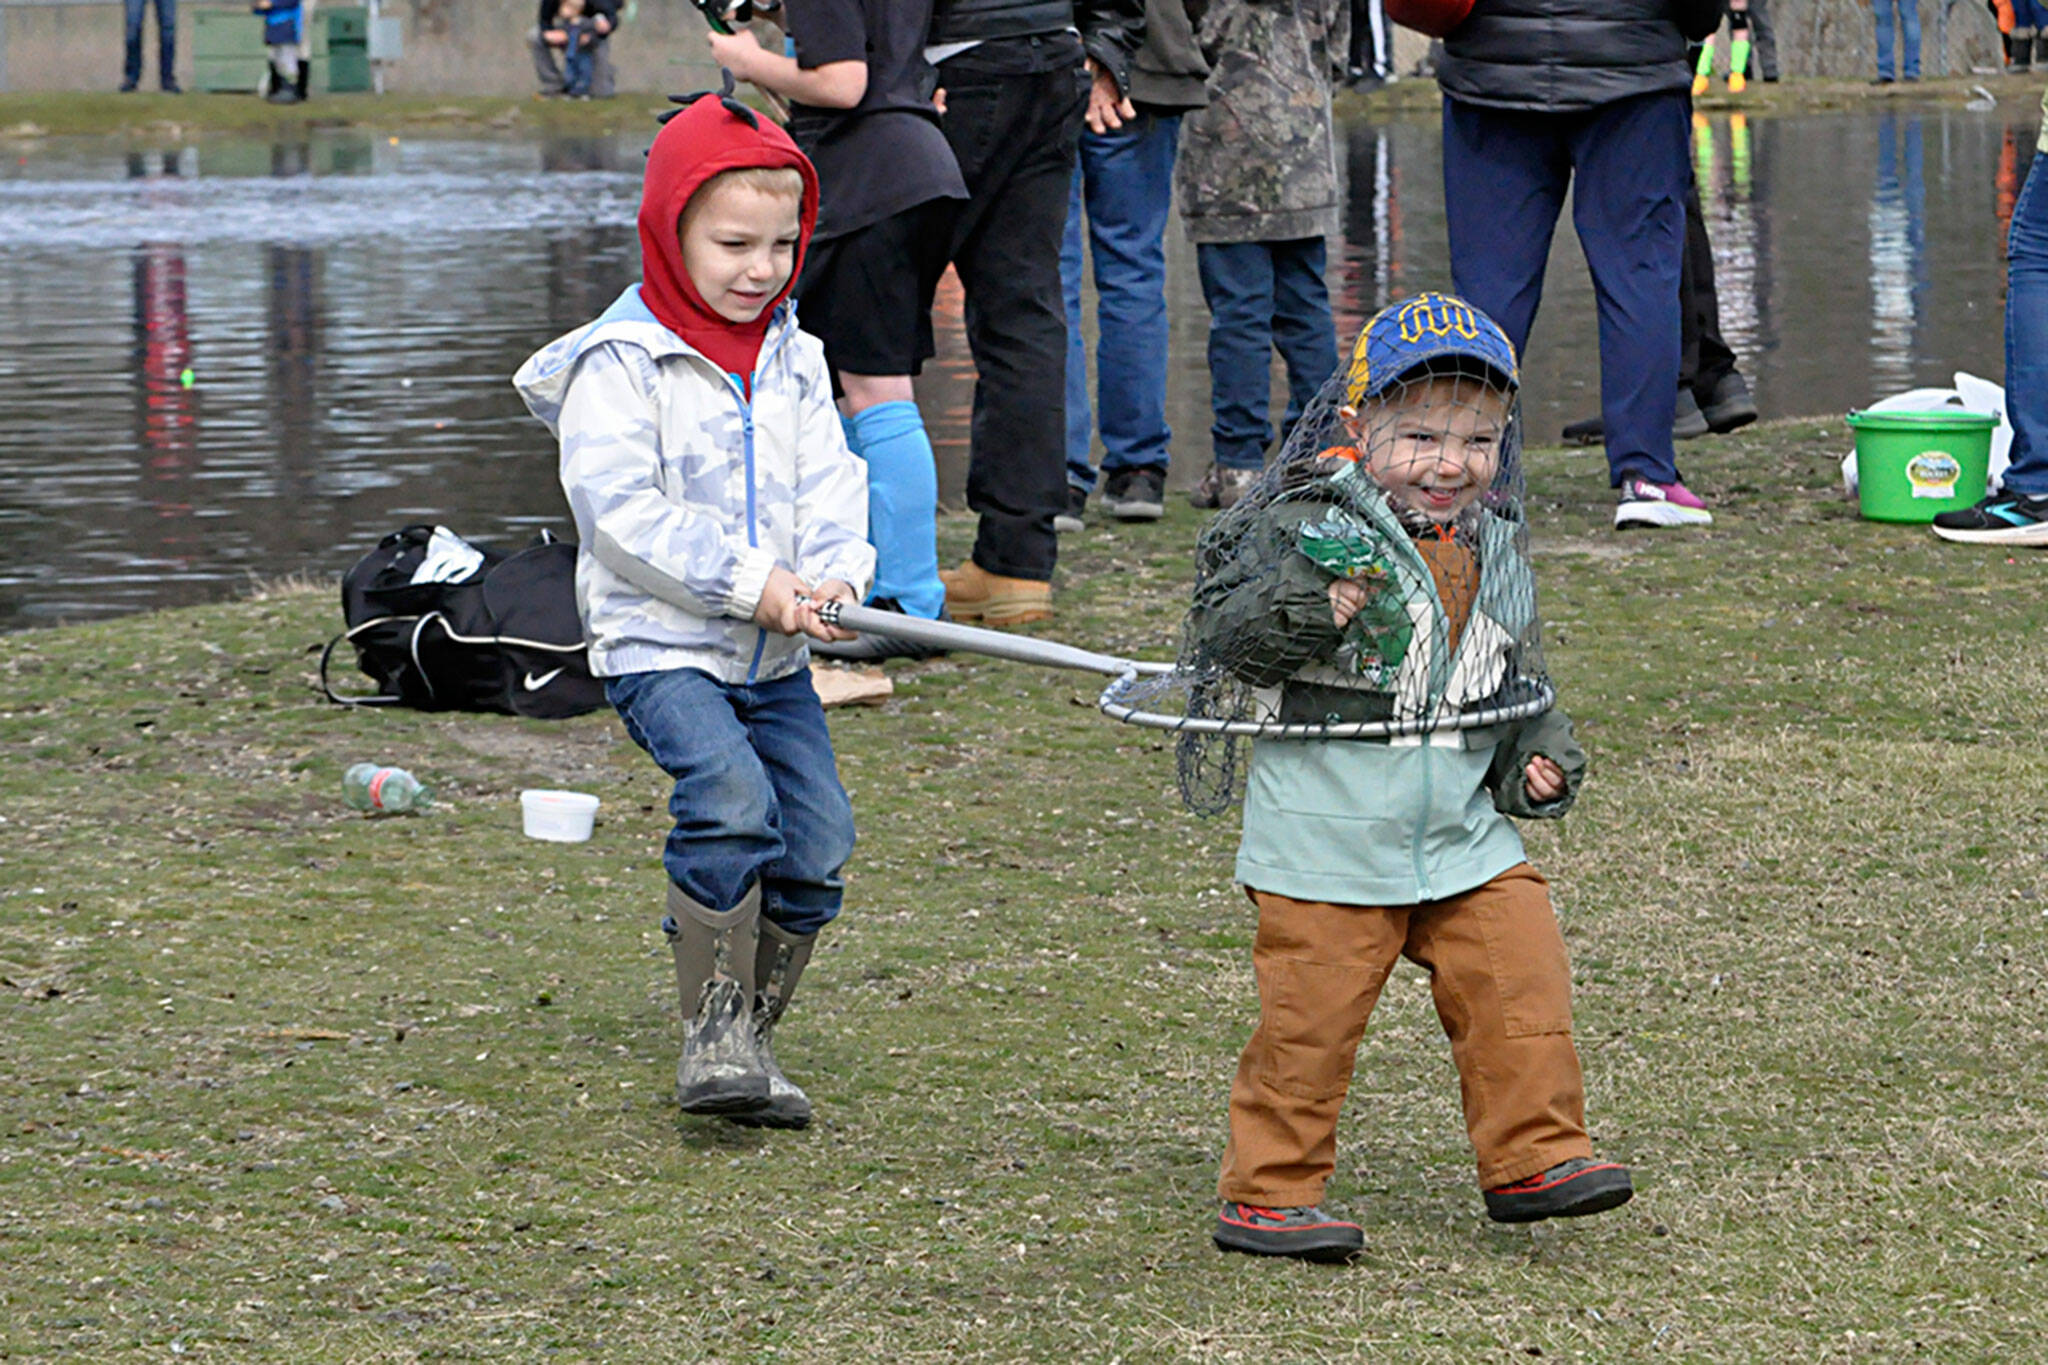 Kids Fishing Day brings hundreds to city pond